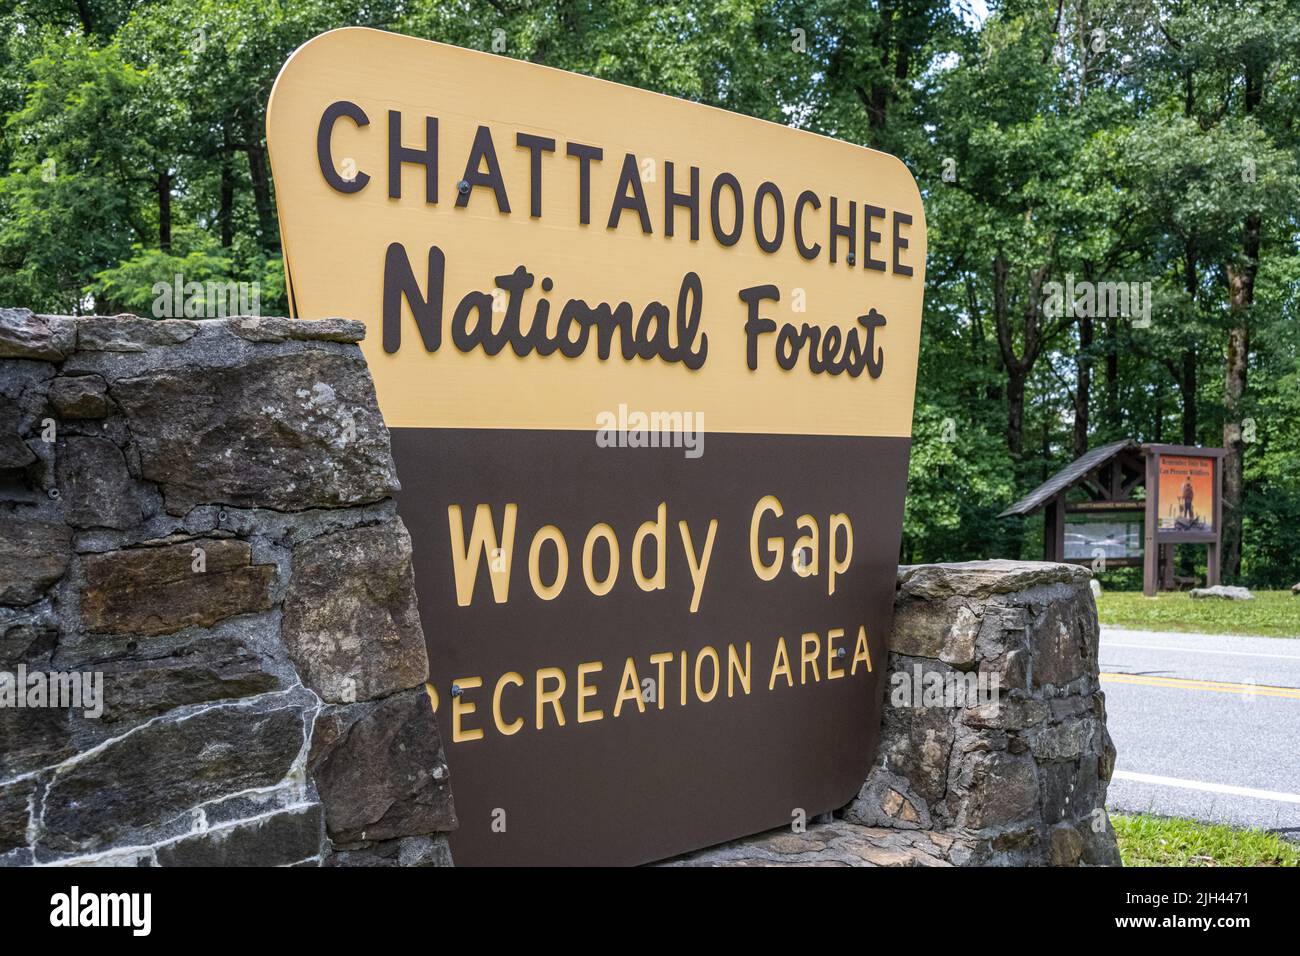 Woody Gap Recreation Area in the Chattahoochee National Forest where the Appalachian Trail crosses Scenic Highway 60 between Suches and Dahlonega, GA. Stock Photo